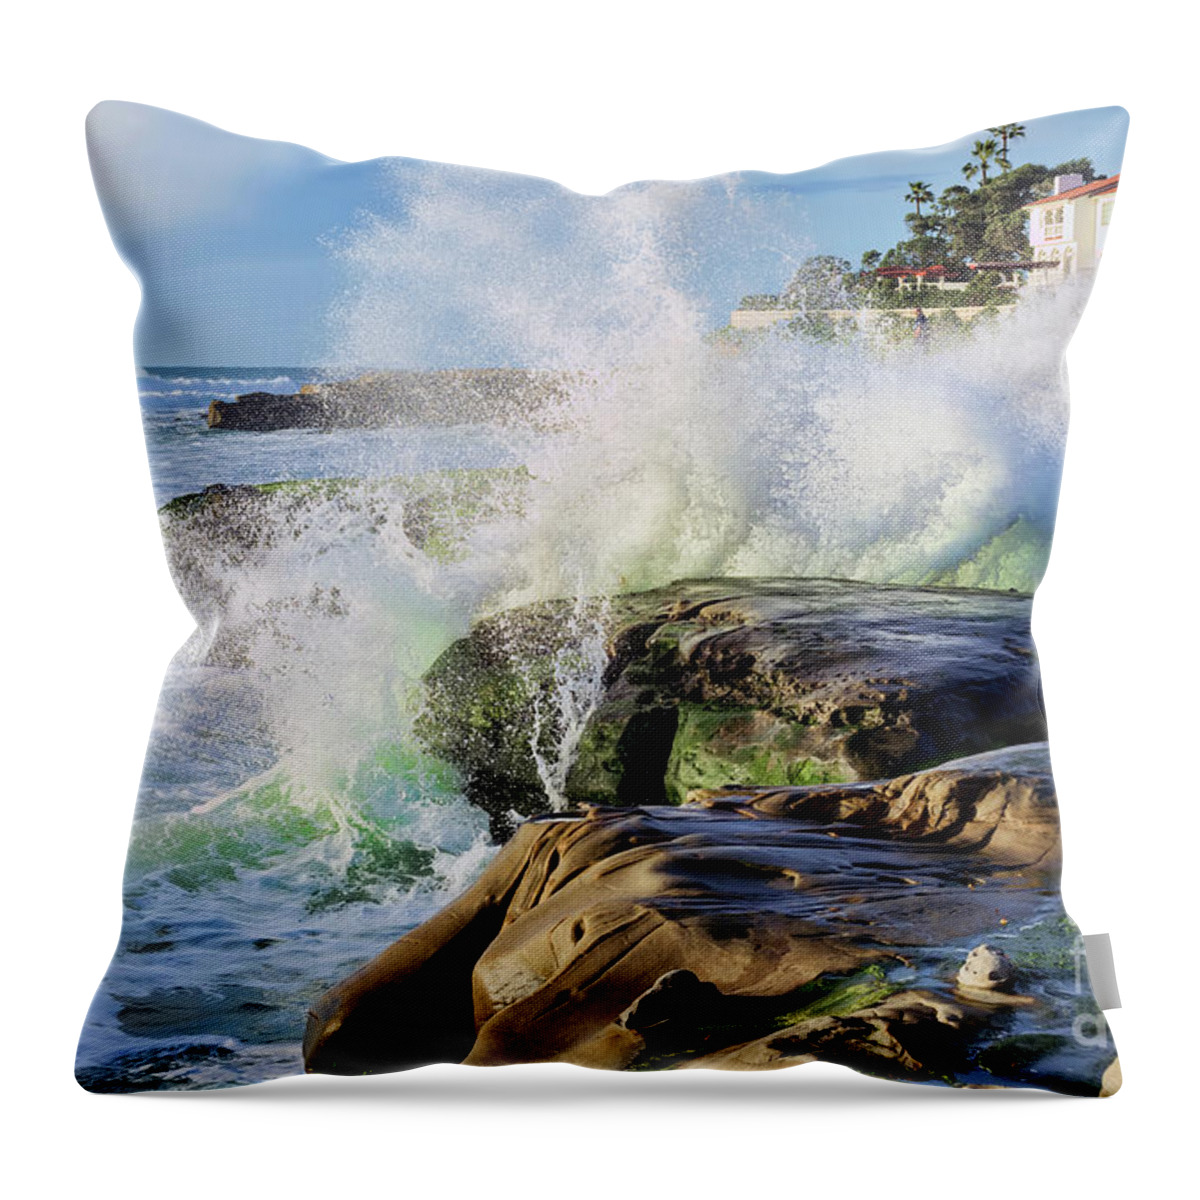 High Throw Pillow featuring the photograph High Tide On The Rocks by Eddie Yerkish